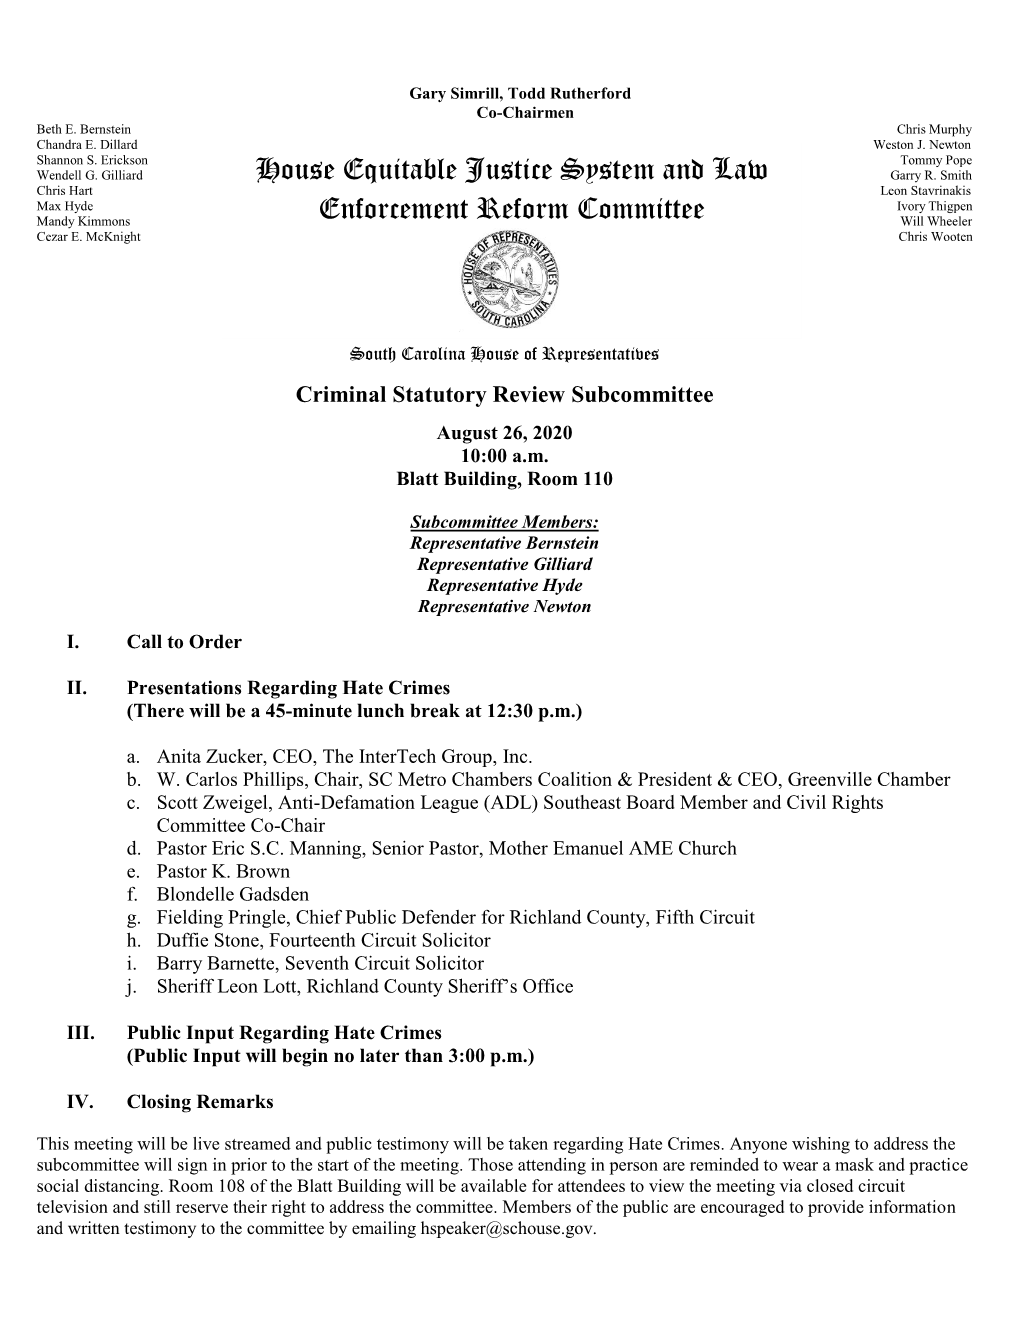 House Equitable Justice System and Law Enforcement Reform Committee